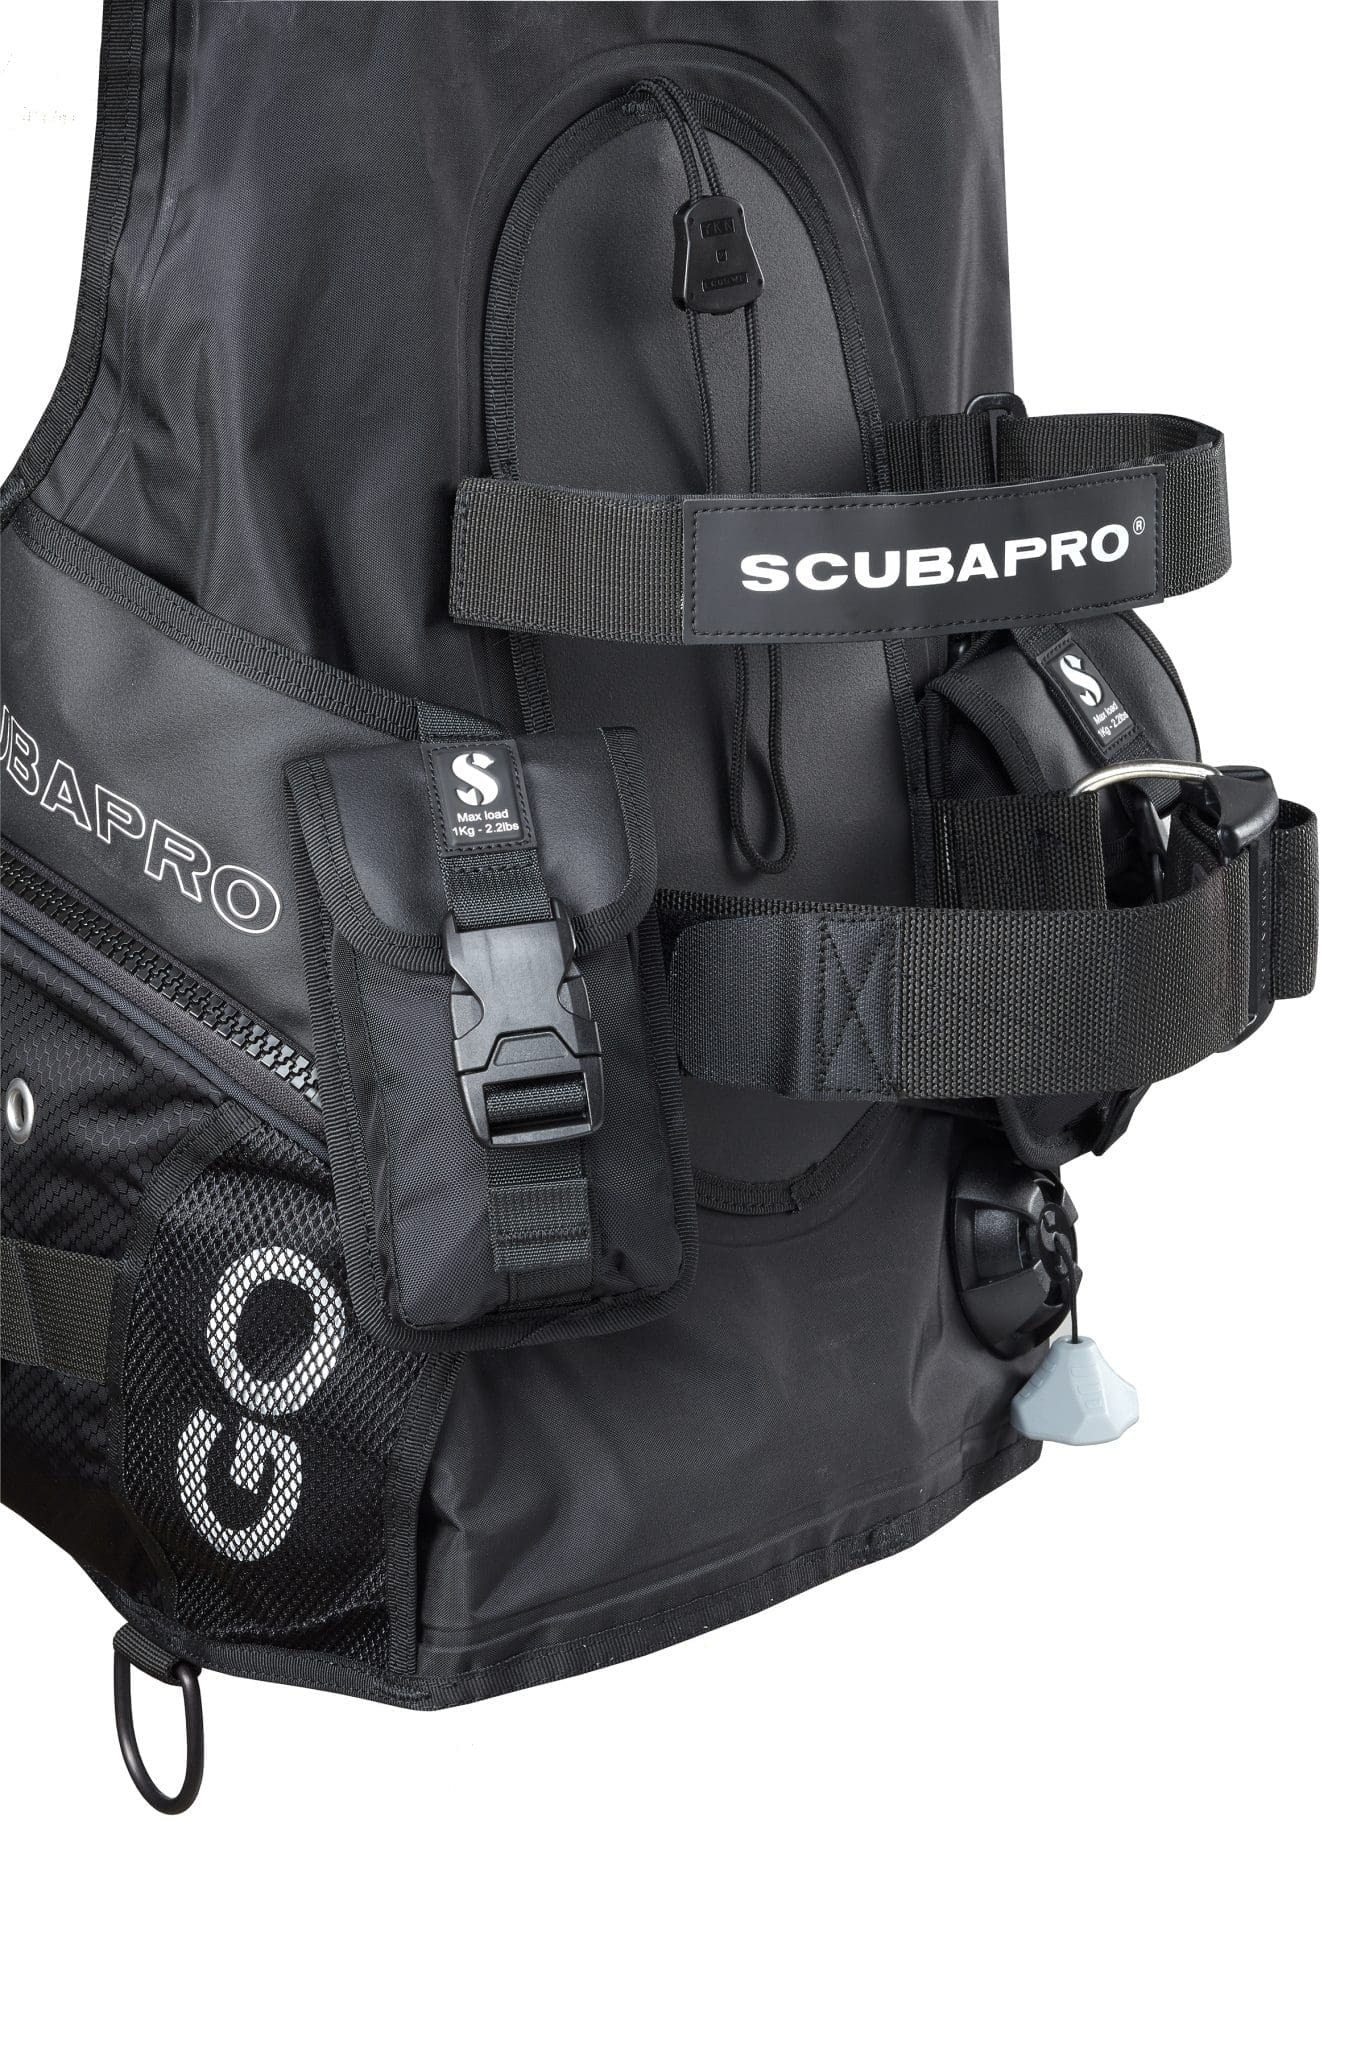 Scubapro GO BCD with Air 2 Source, X-Large 【メーカー包装済】